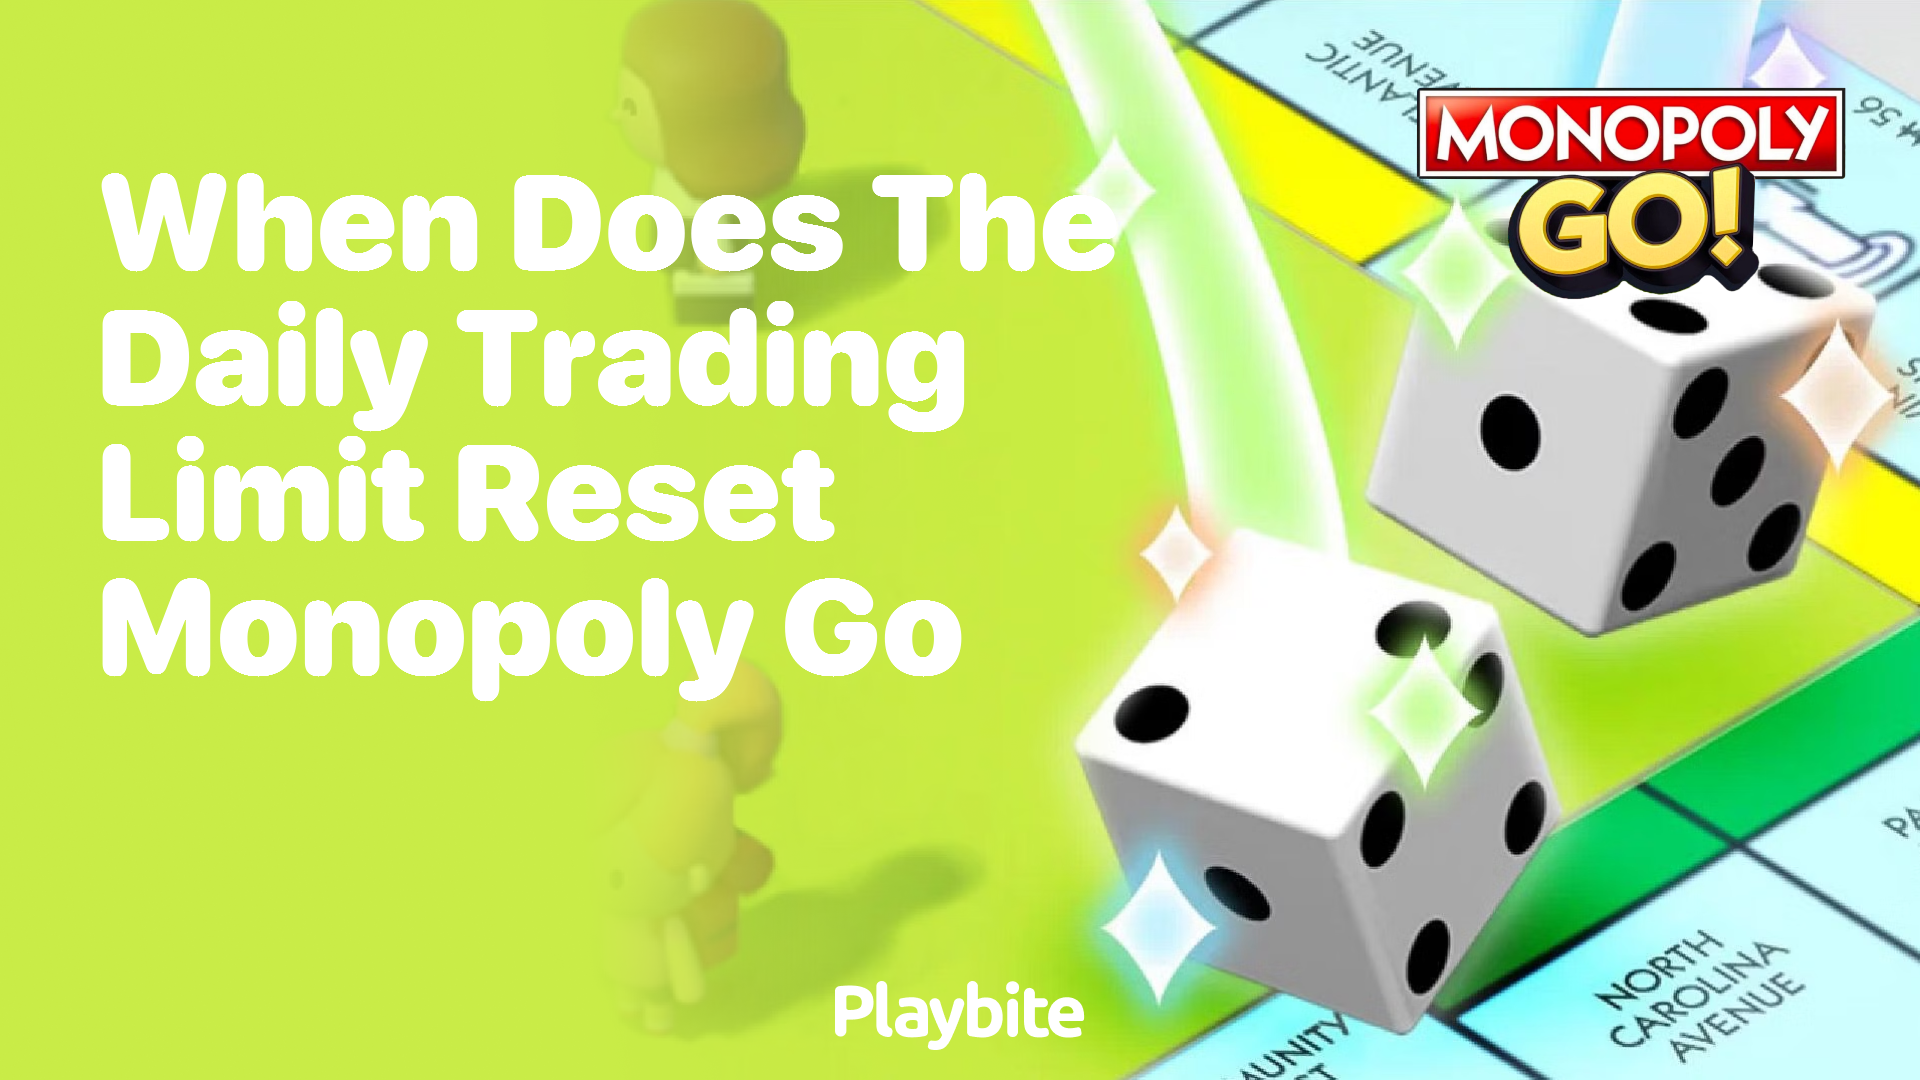 When Does the Daily Trading Limit Reset in Monopoly Go?